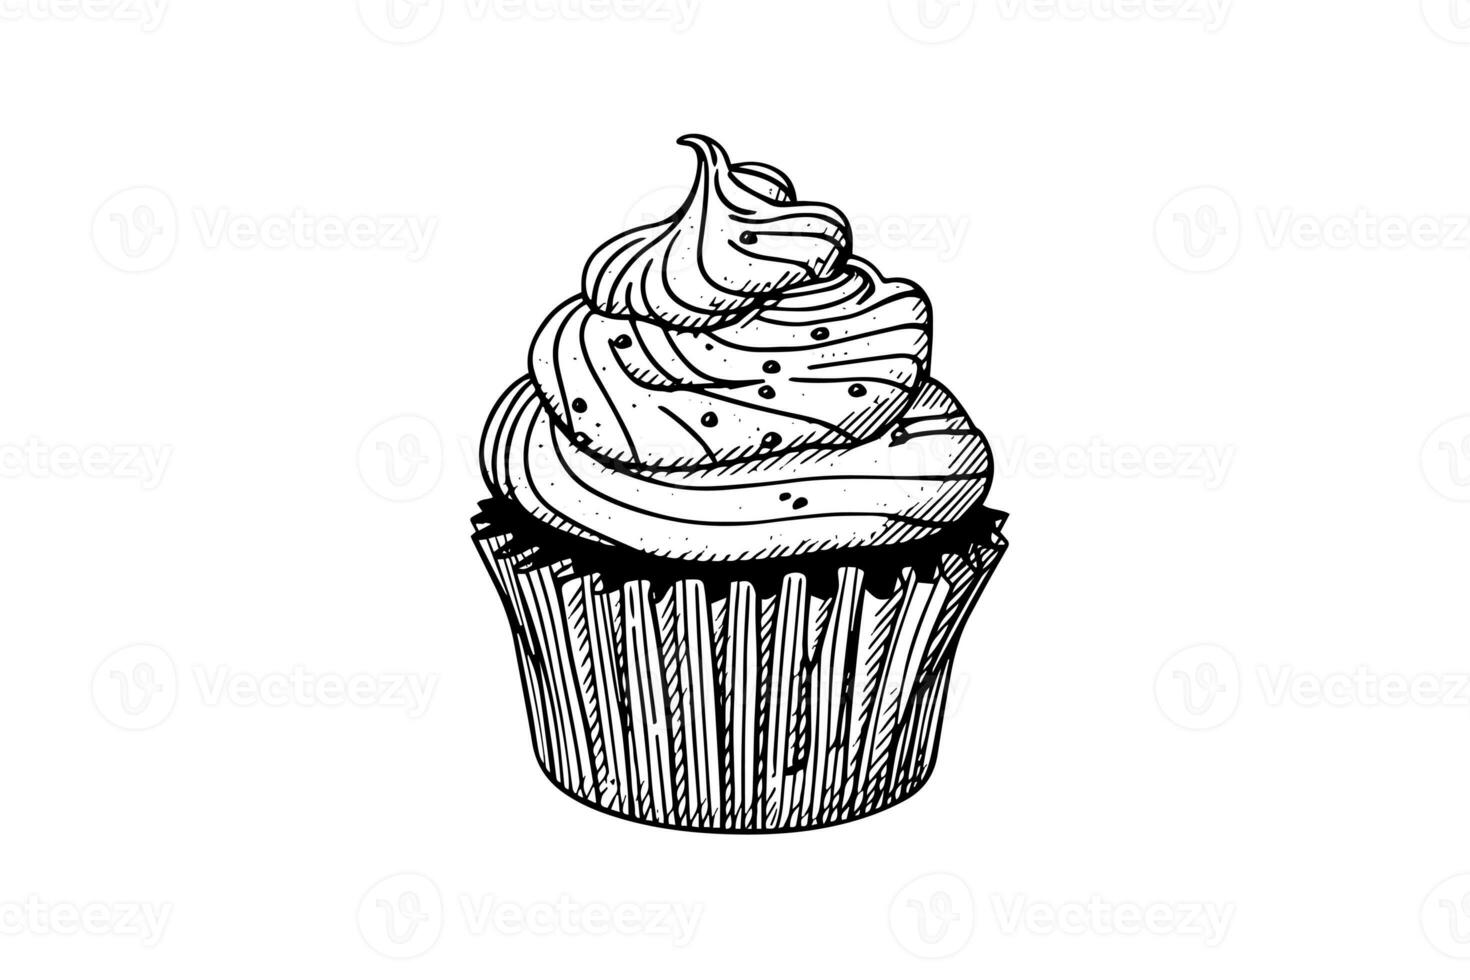 Cupcake in engraving style. Ink sketch isolated on white background. Hand drawn vector illustration photo